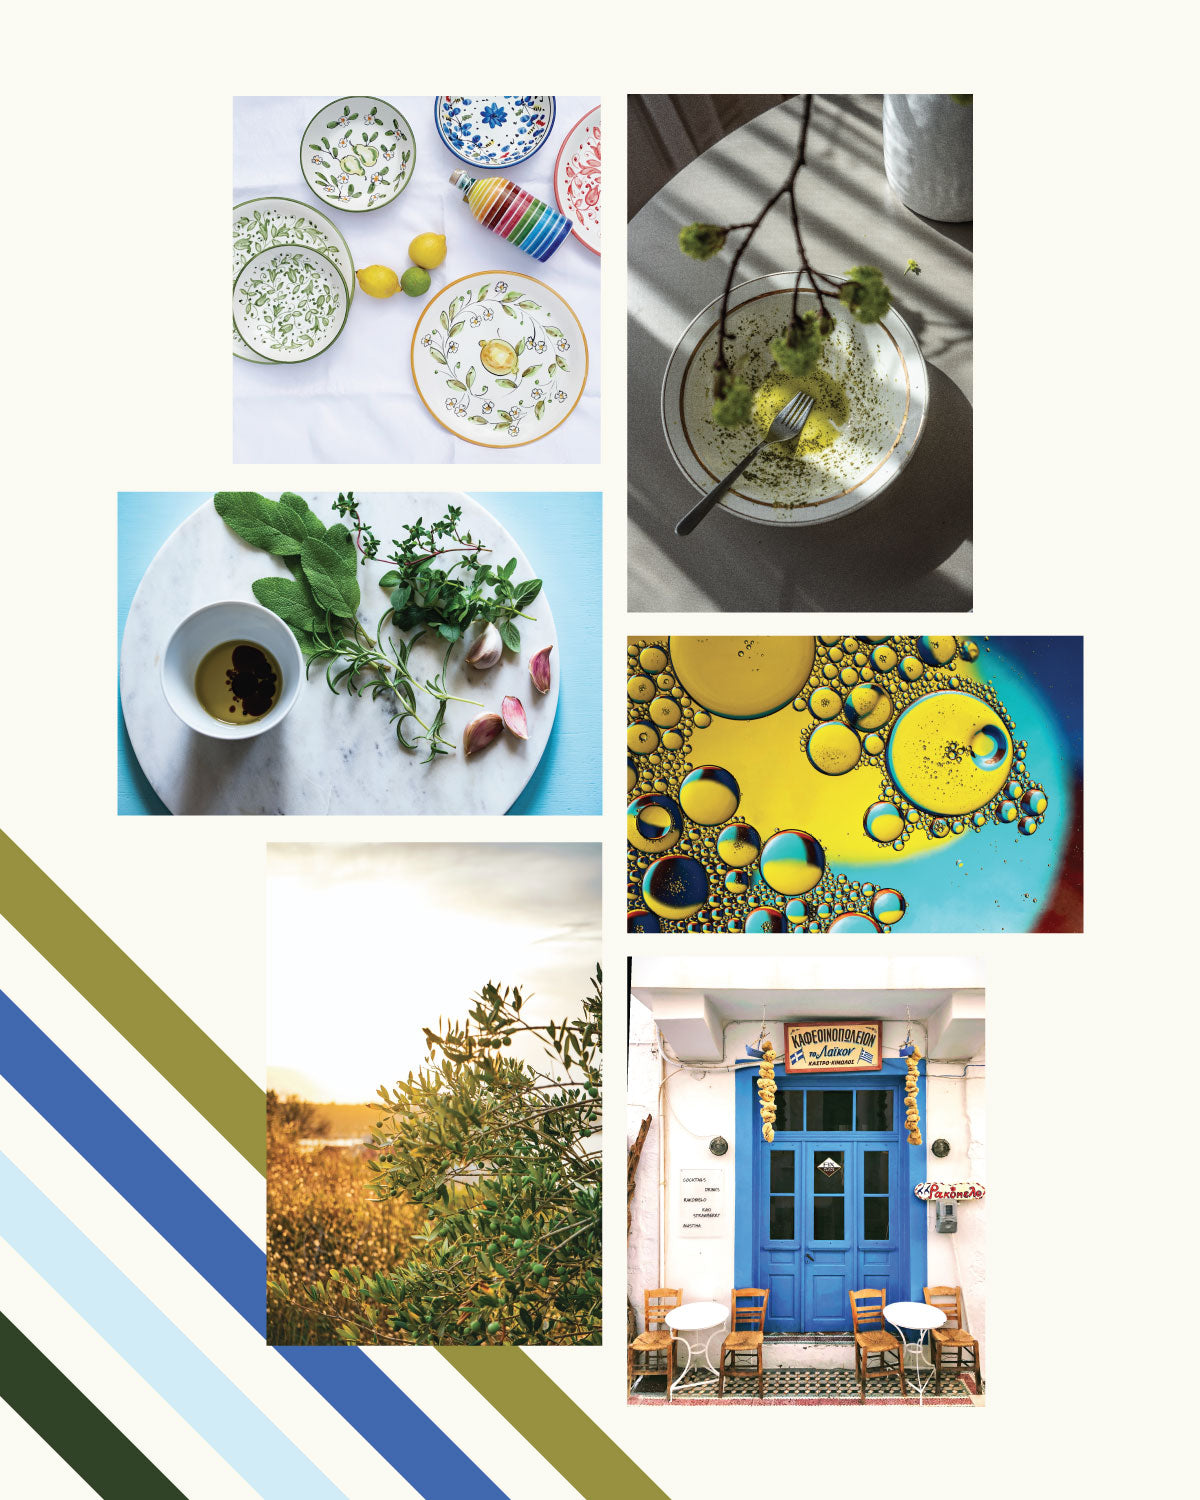 A collection of Greek-inspired images from Unsplash with stripes showing the Olea color palette